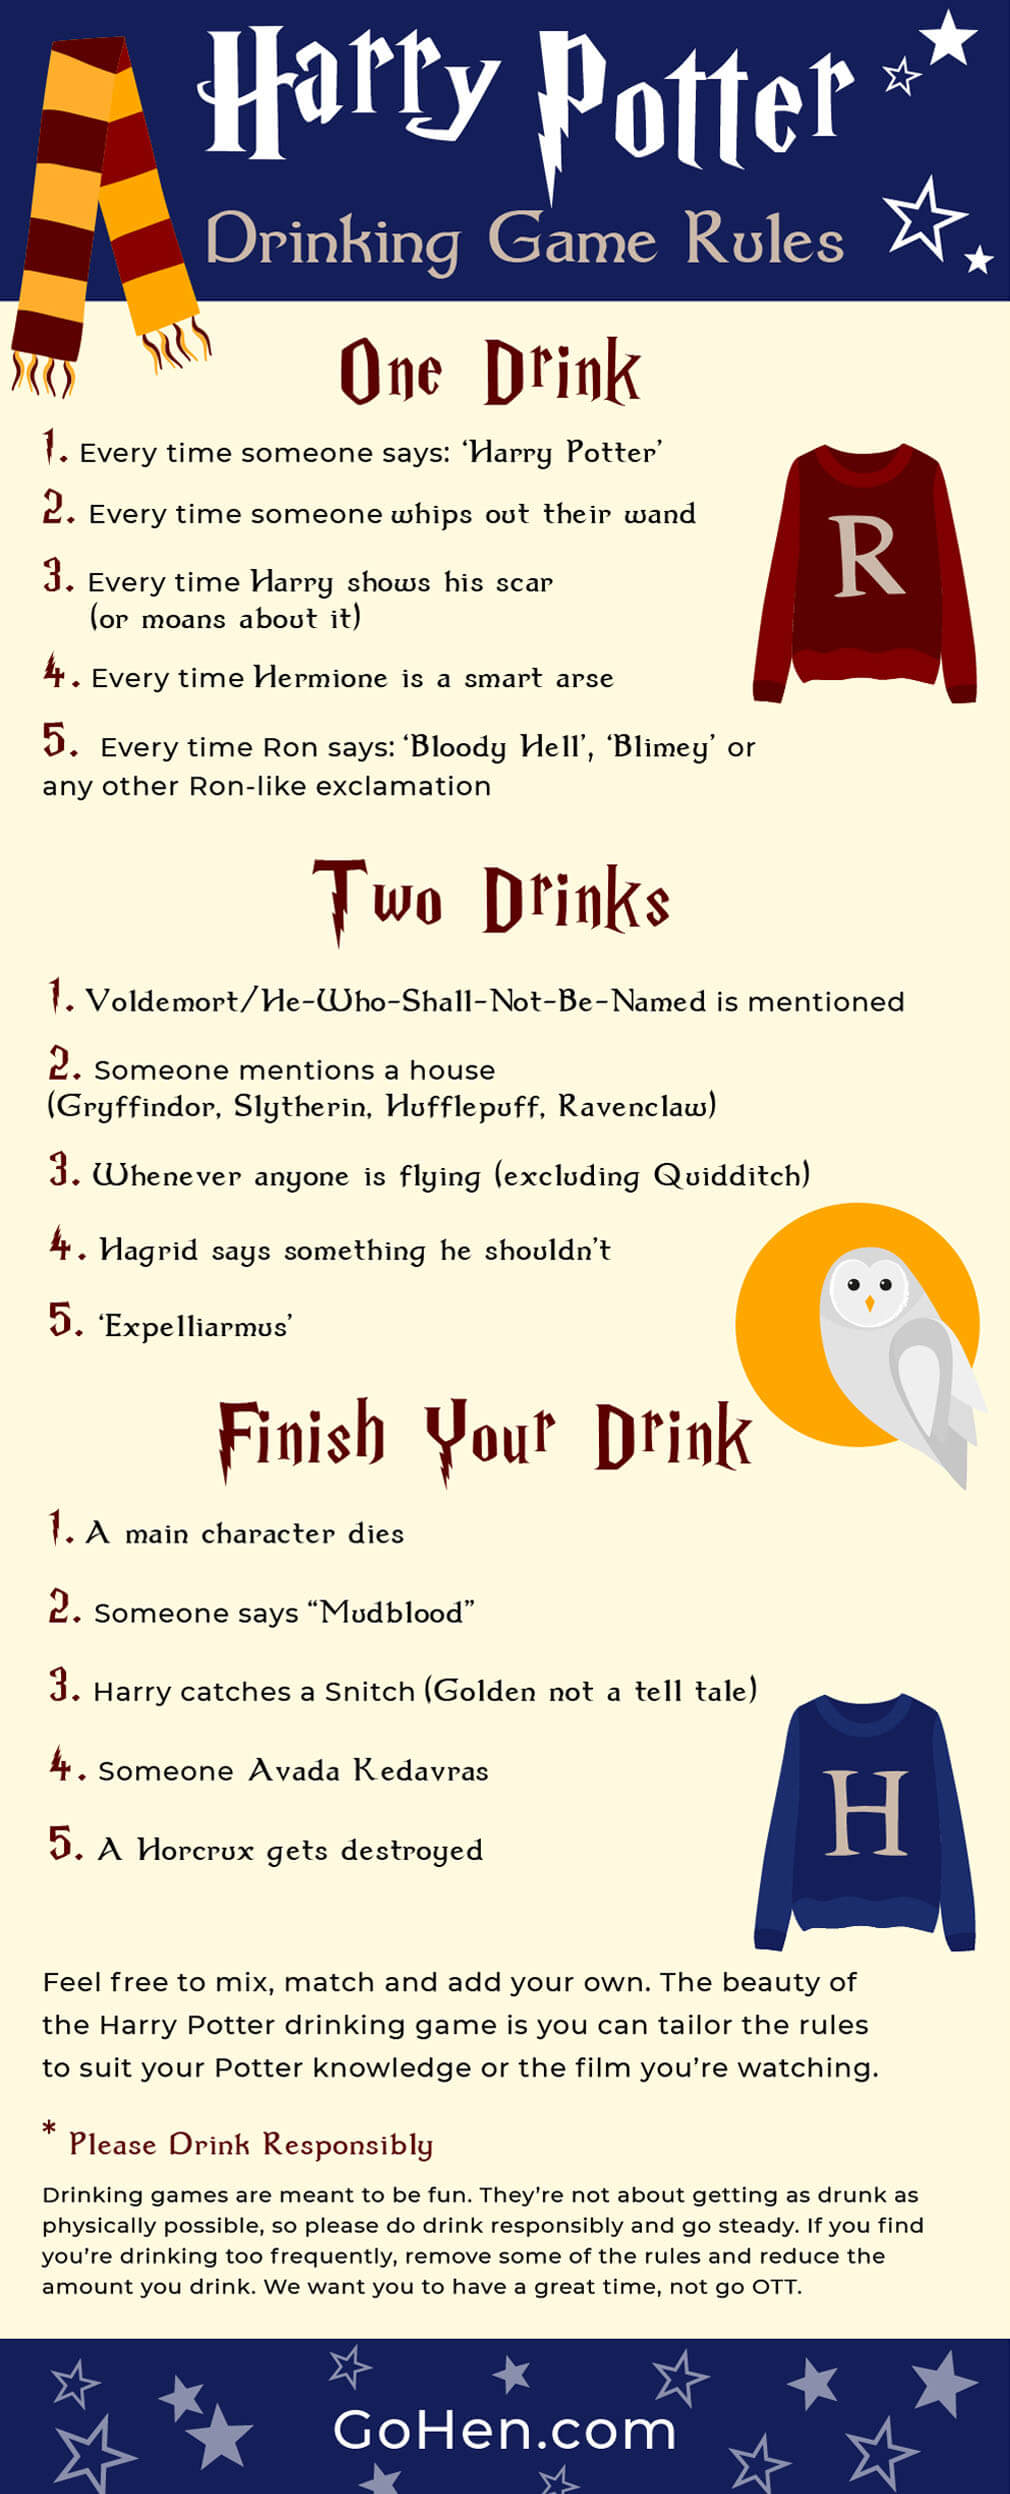 Harry Porter drinking game rules - movie drinking games